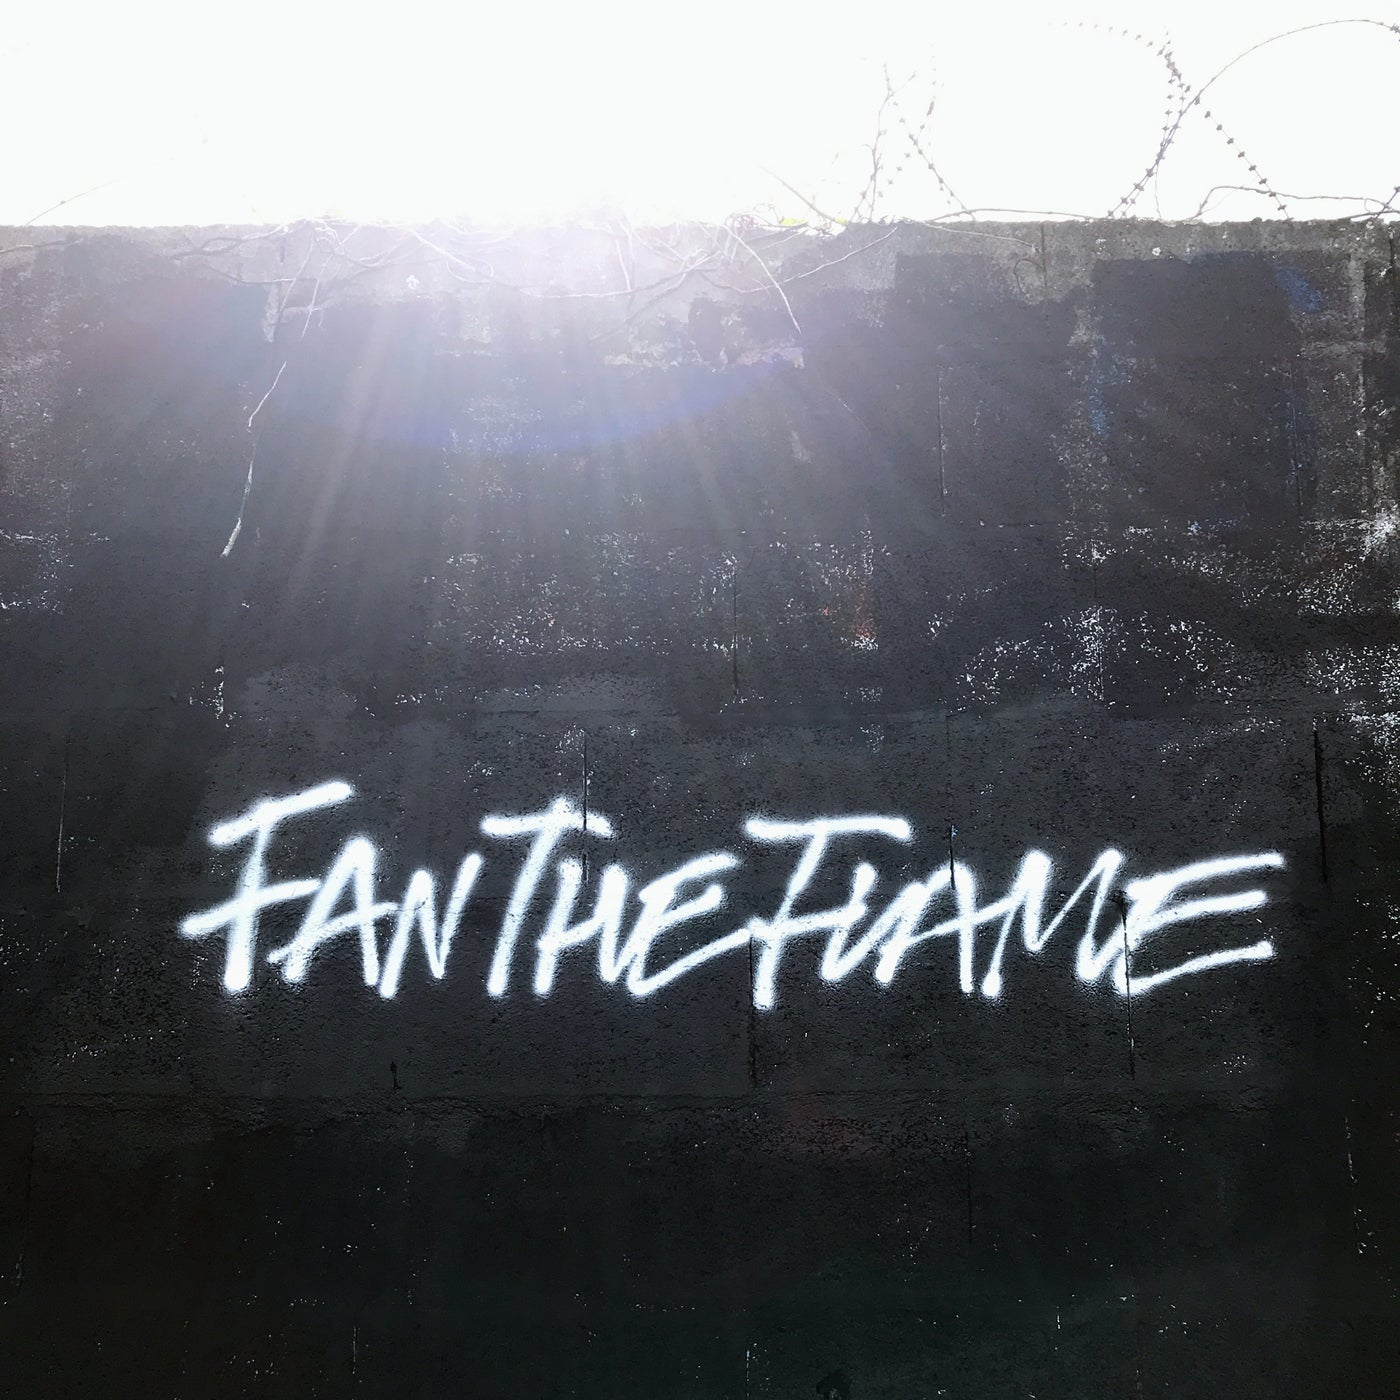 Fan the Flame (Provocation)